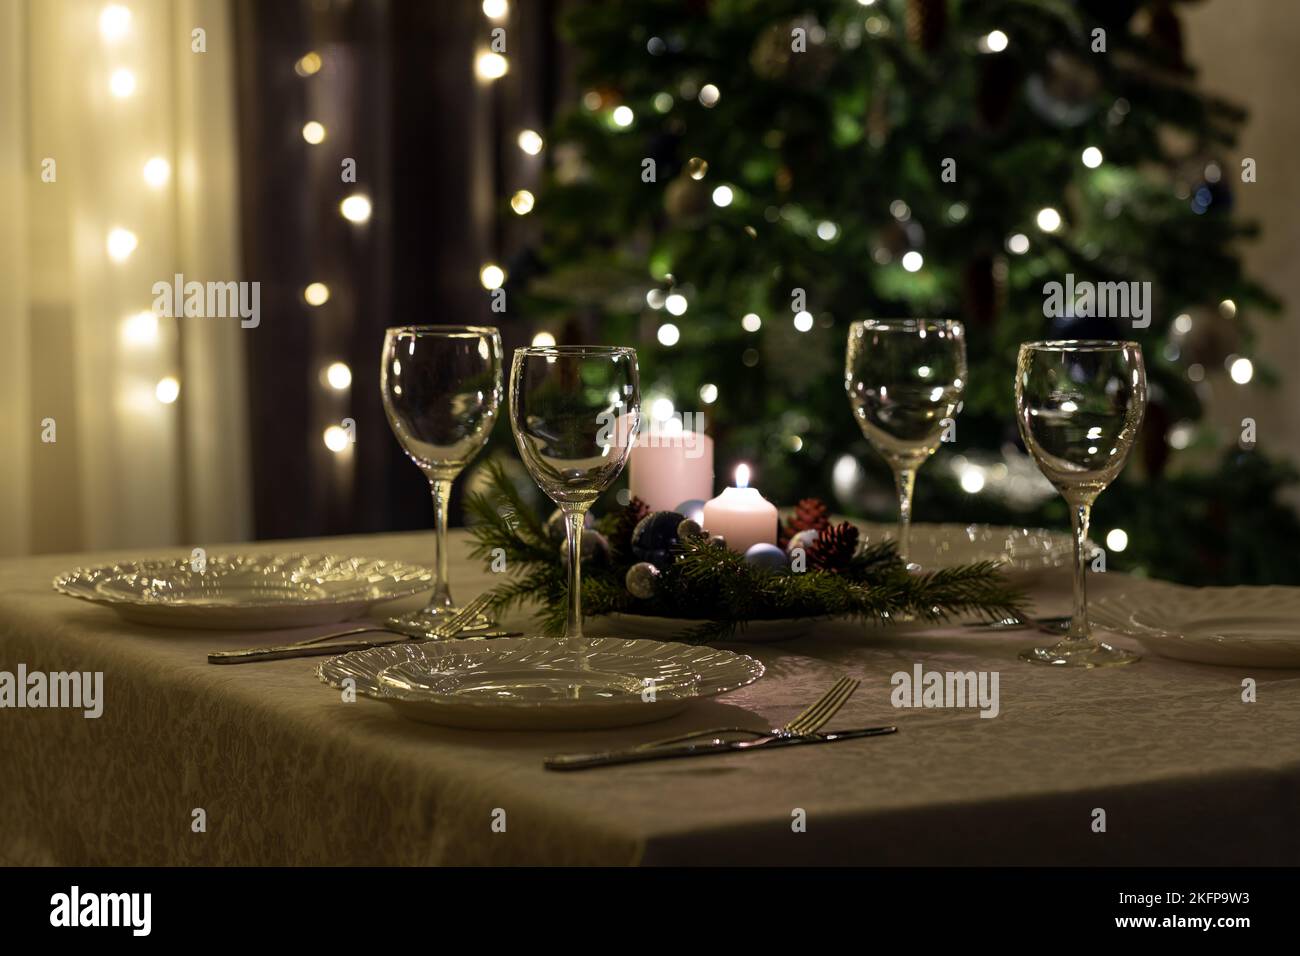 Serving the festive table. Food and drinks, plates and glasses. Evening lights and candles. Christmas dinner on Christmas Eve and New Year's Eve. Stock Photo